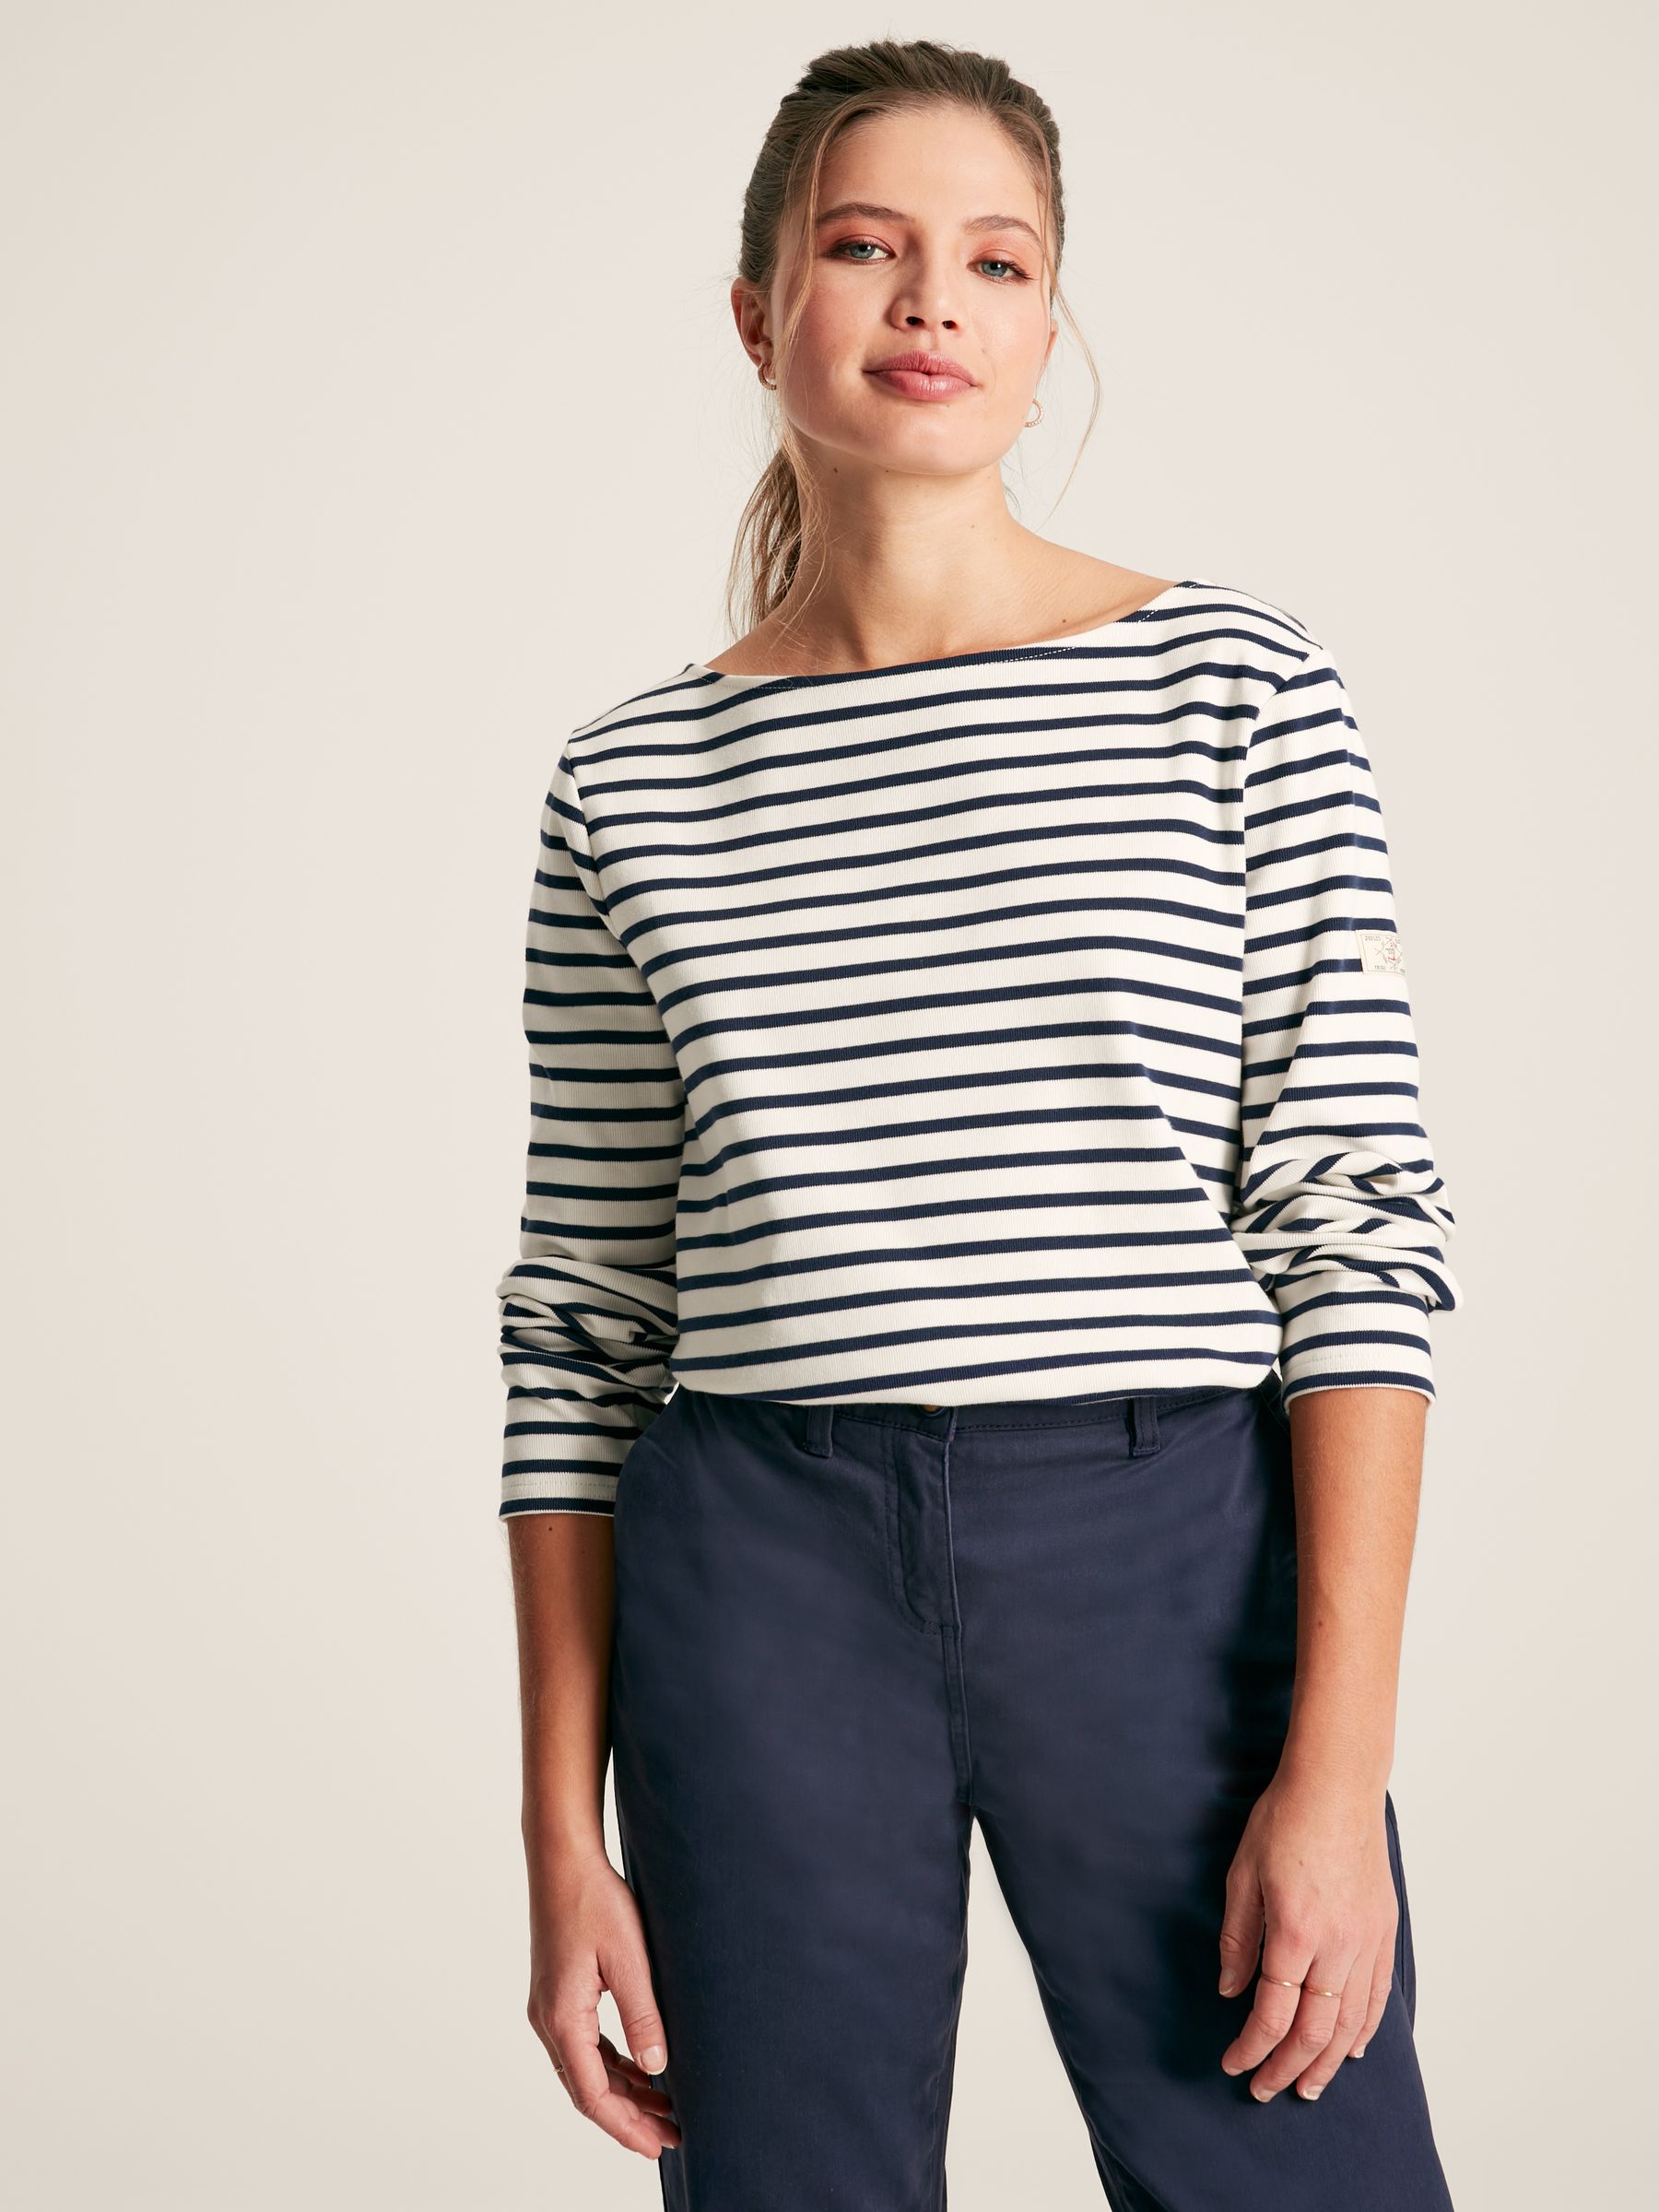 Buy New Harbour Cream/Navy Striped Boat Neck Breton Top from the Joules ...